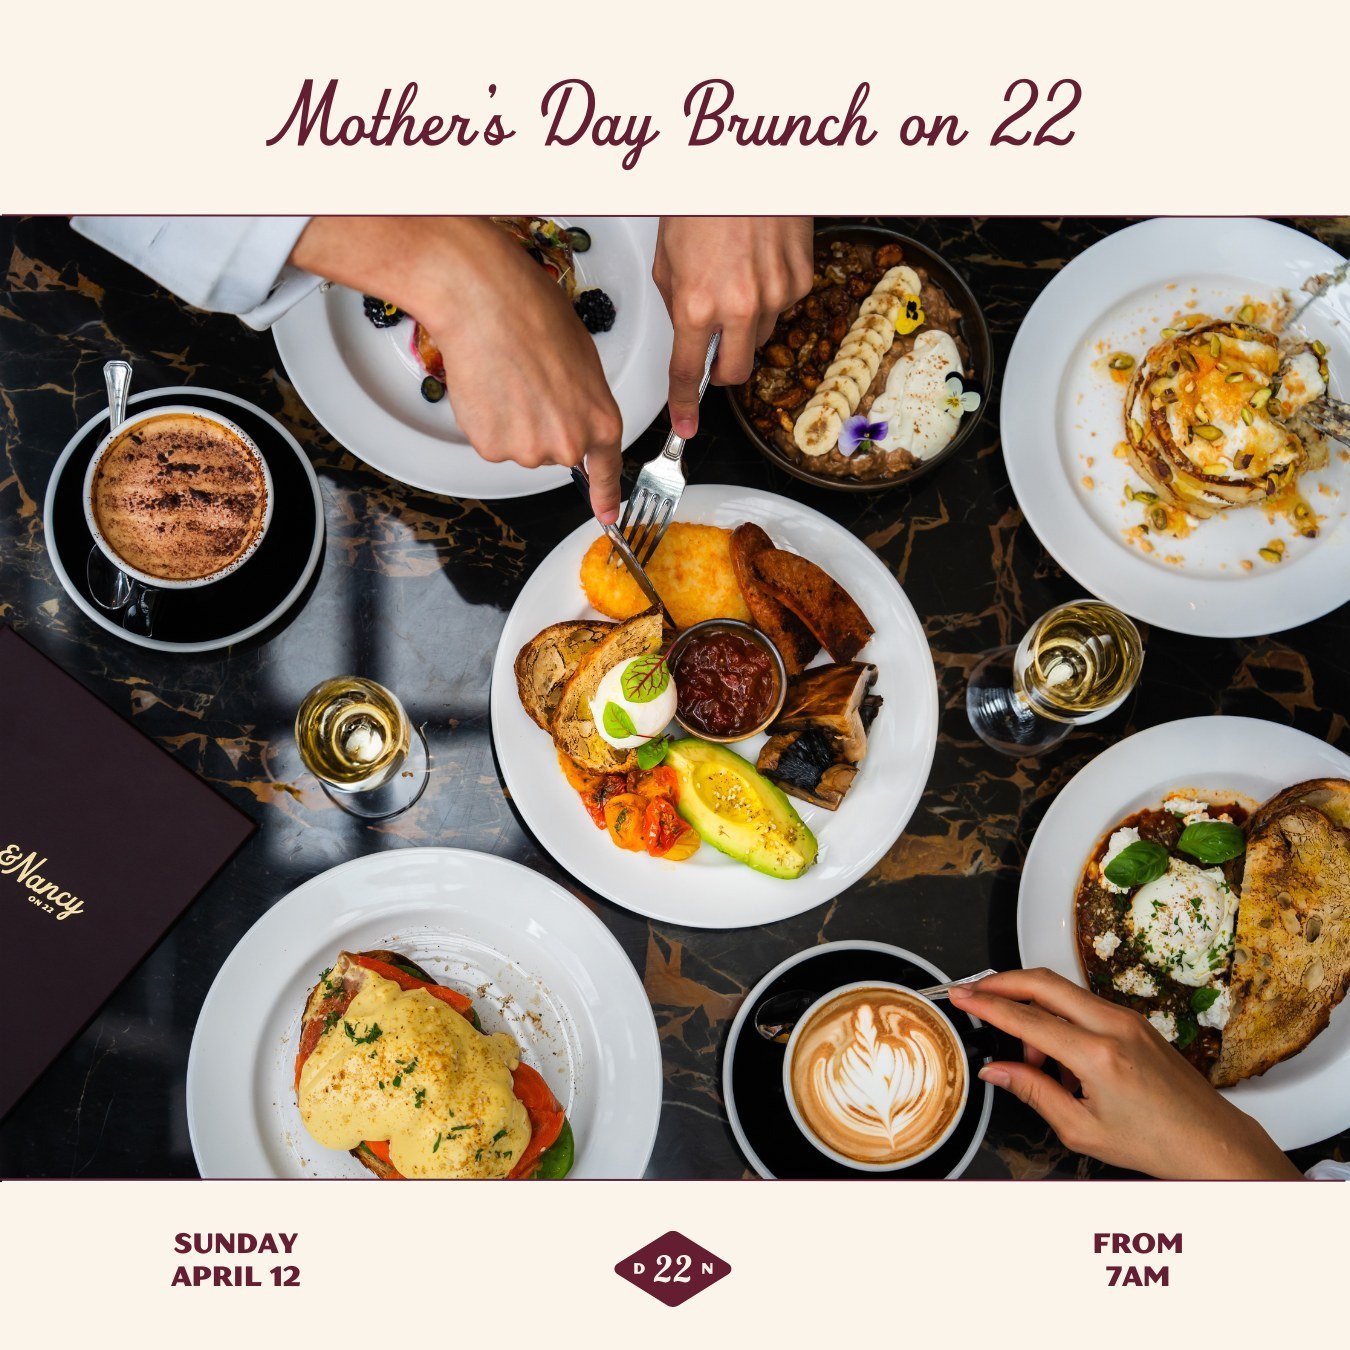 Treat Mum to a sky-high Mother&rsquo;s Day brunch at Dean &amp; Nancy on 22 on Sunday, May 12. We&rsquo;re extending our morning trade a bit longer to celebrate, and greeting Mum with a complimentary sparkling on arrival 🥂  Elevate her day from the 